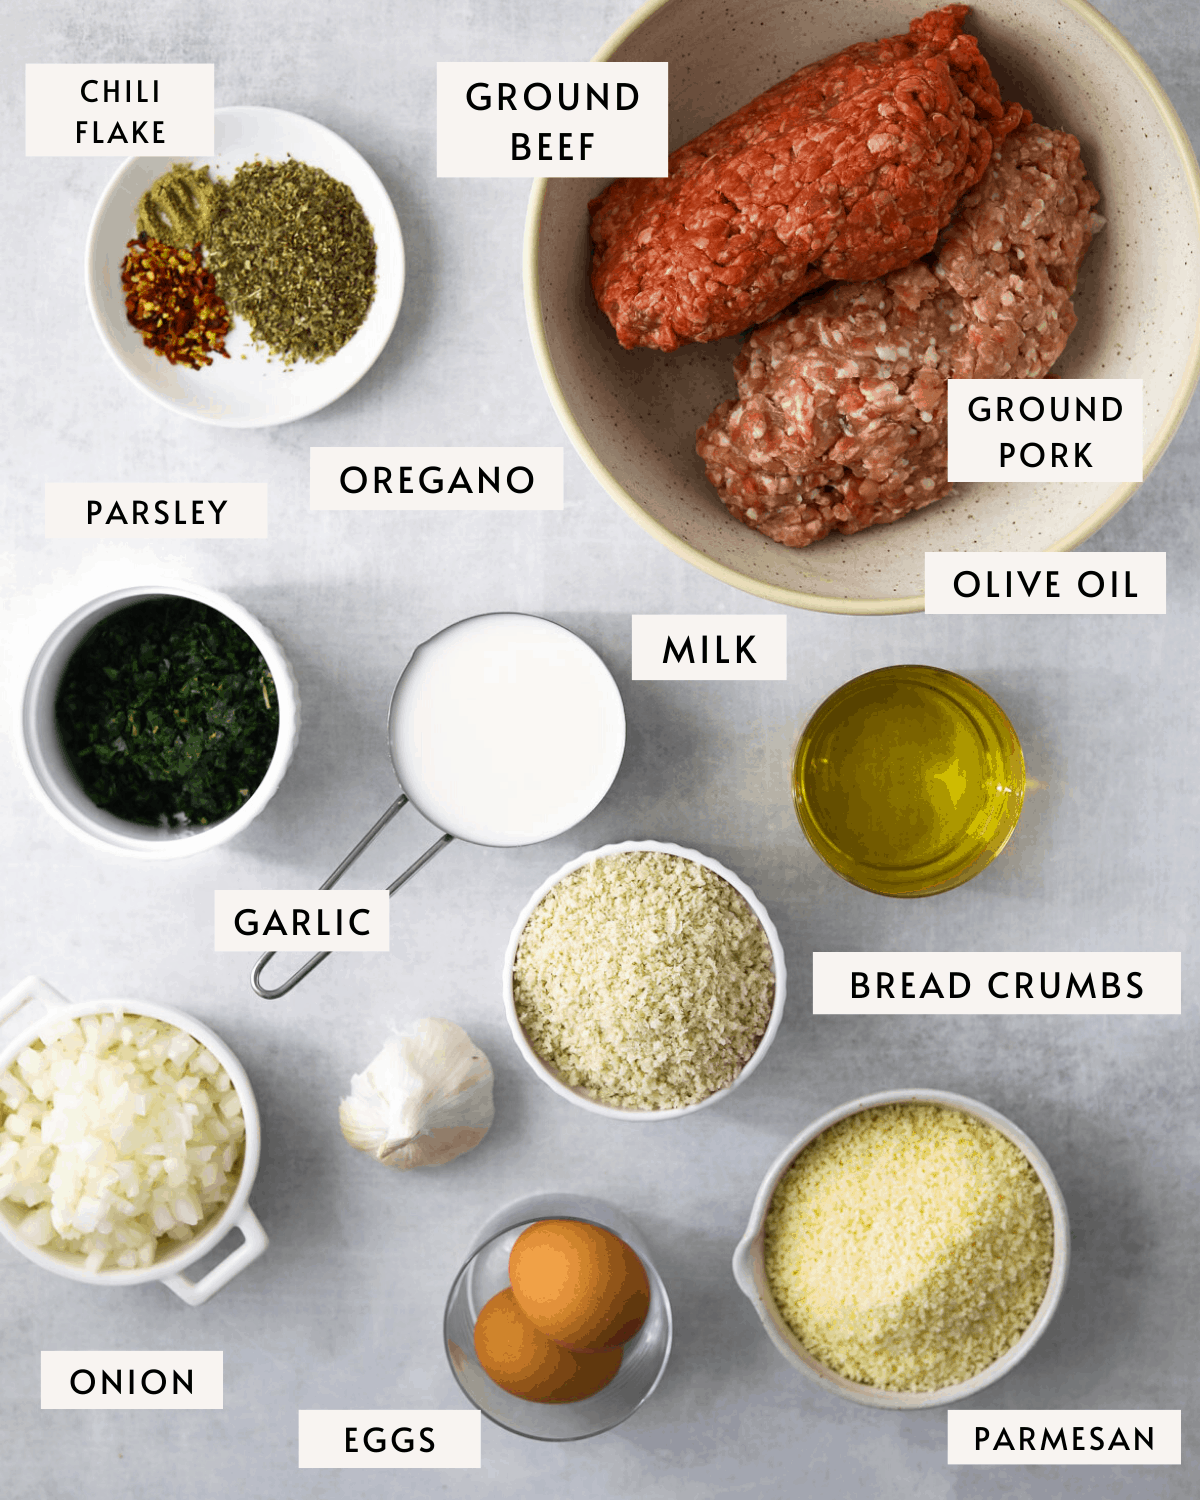 meatball ingredients in individual dishes prepped for cooking: ground beef, ground pork, breadcrumbs, spices, etc